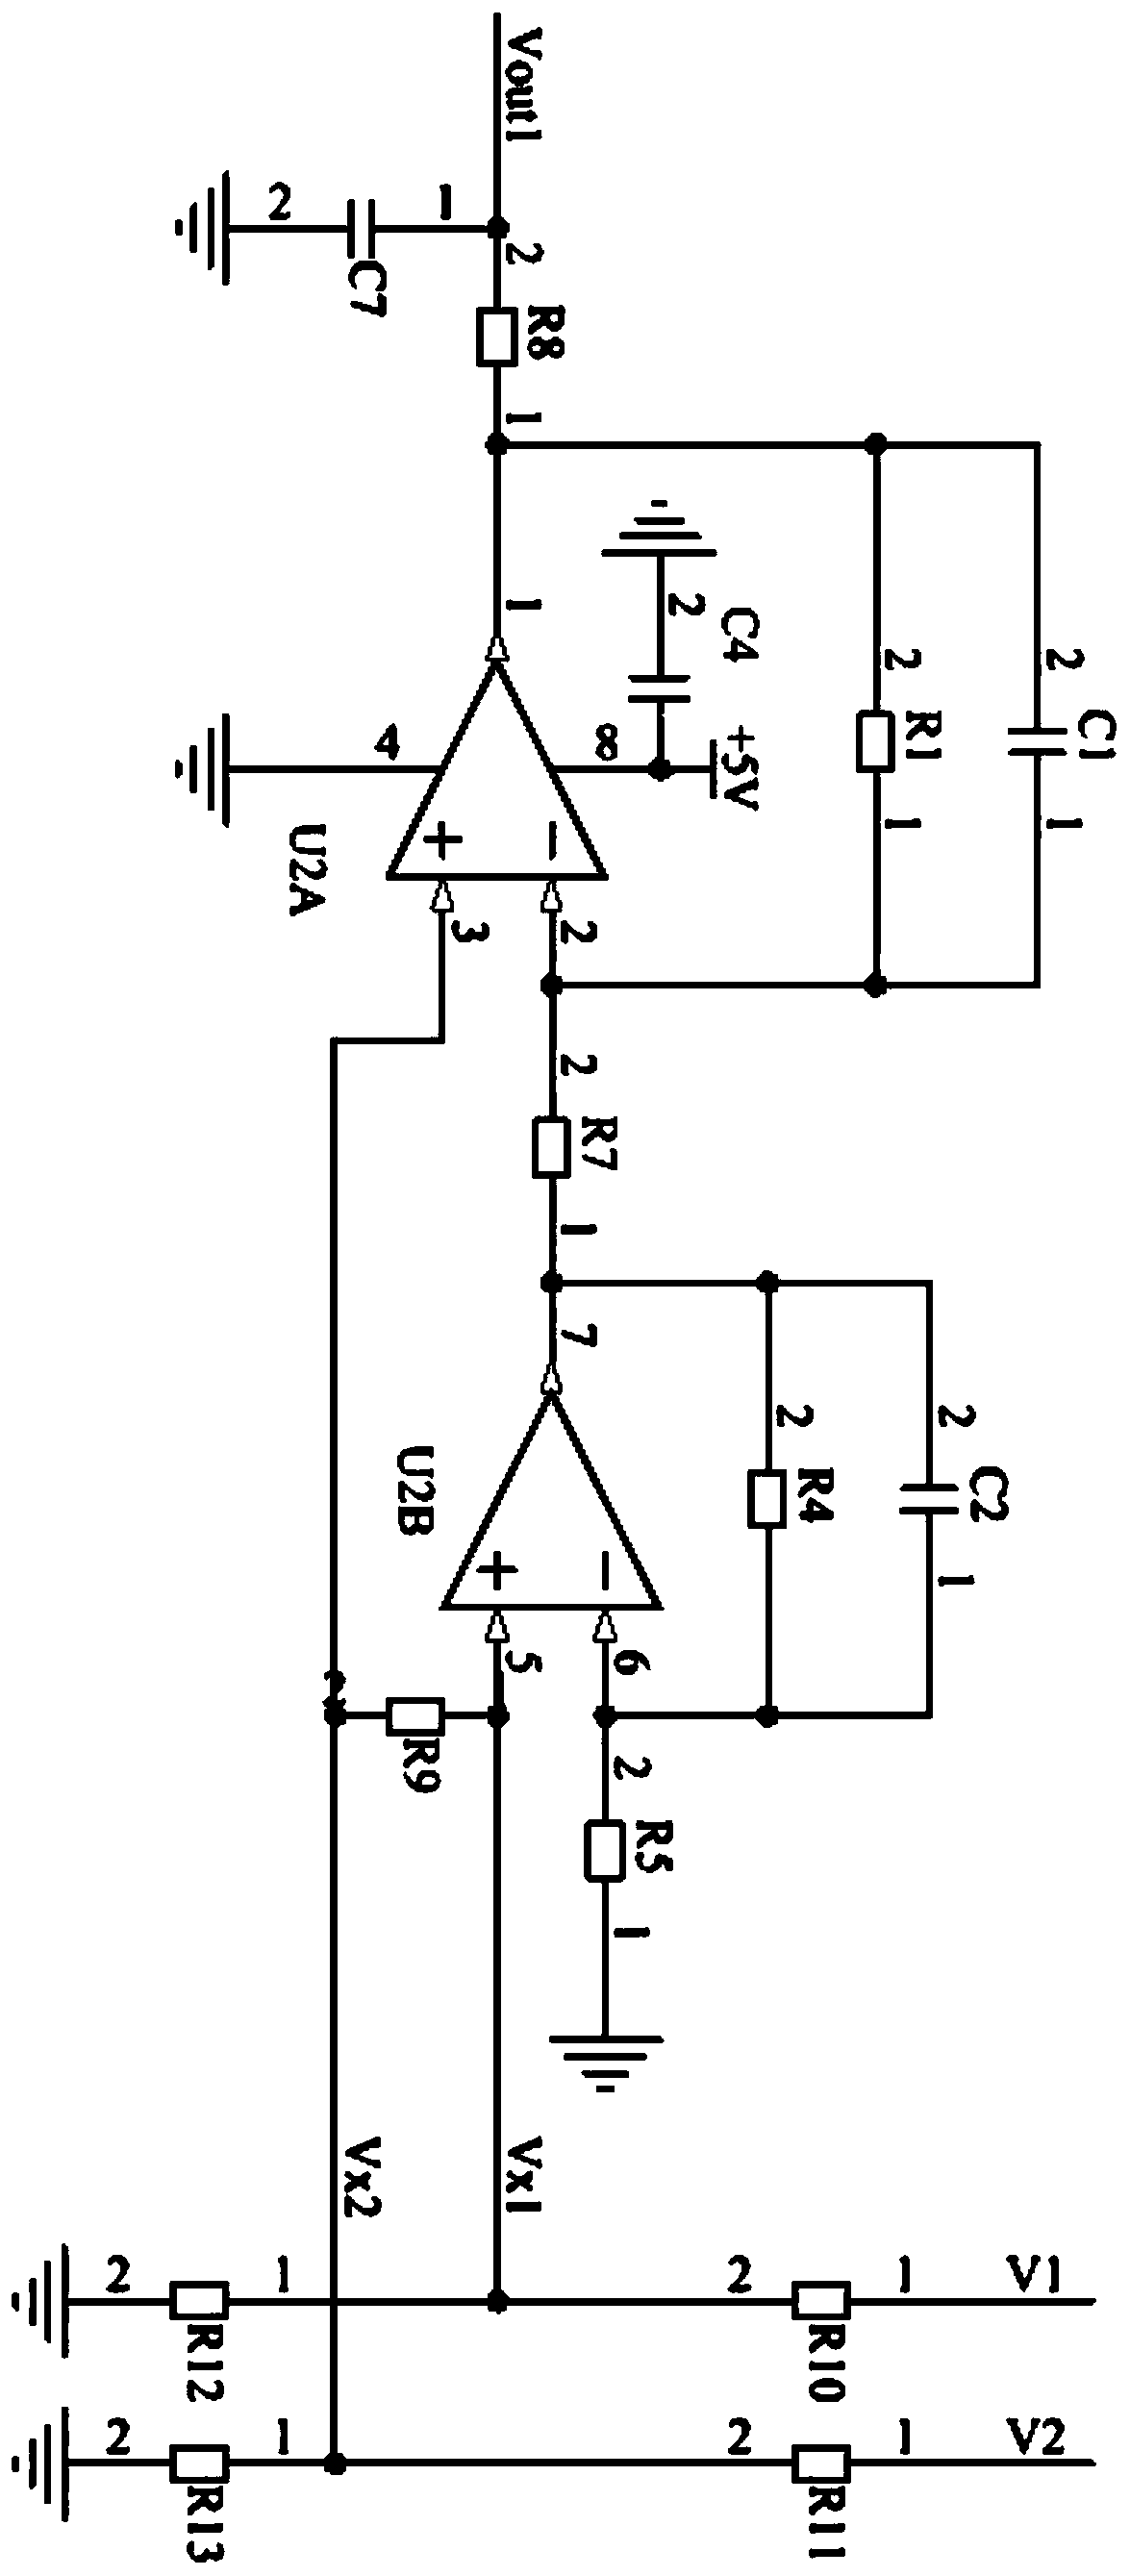 The power supply circuit is suitable for aerospace application